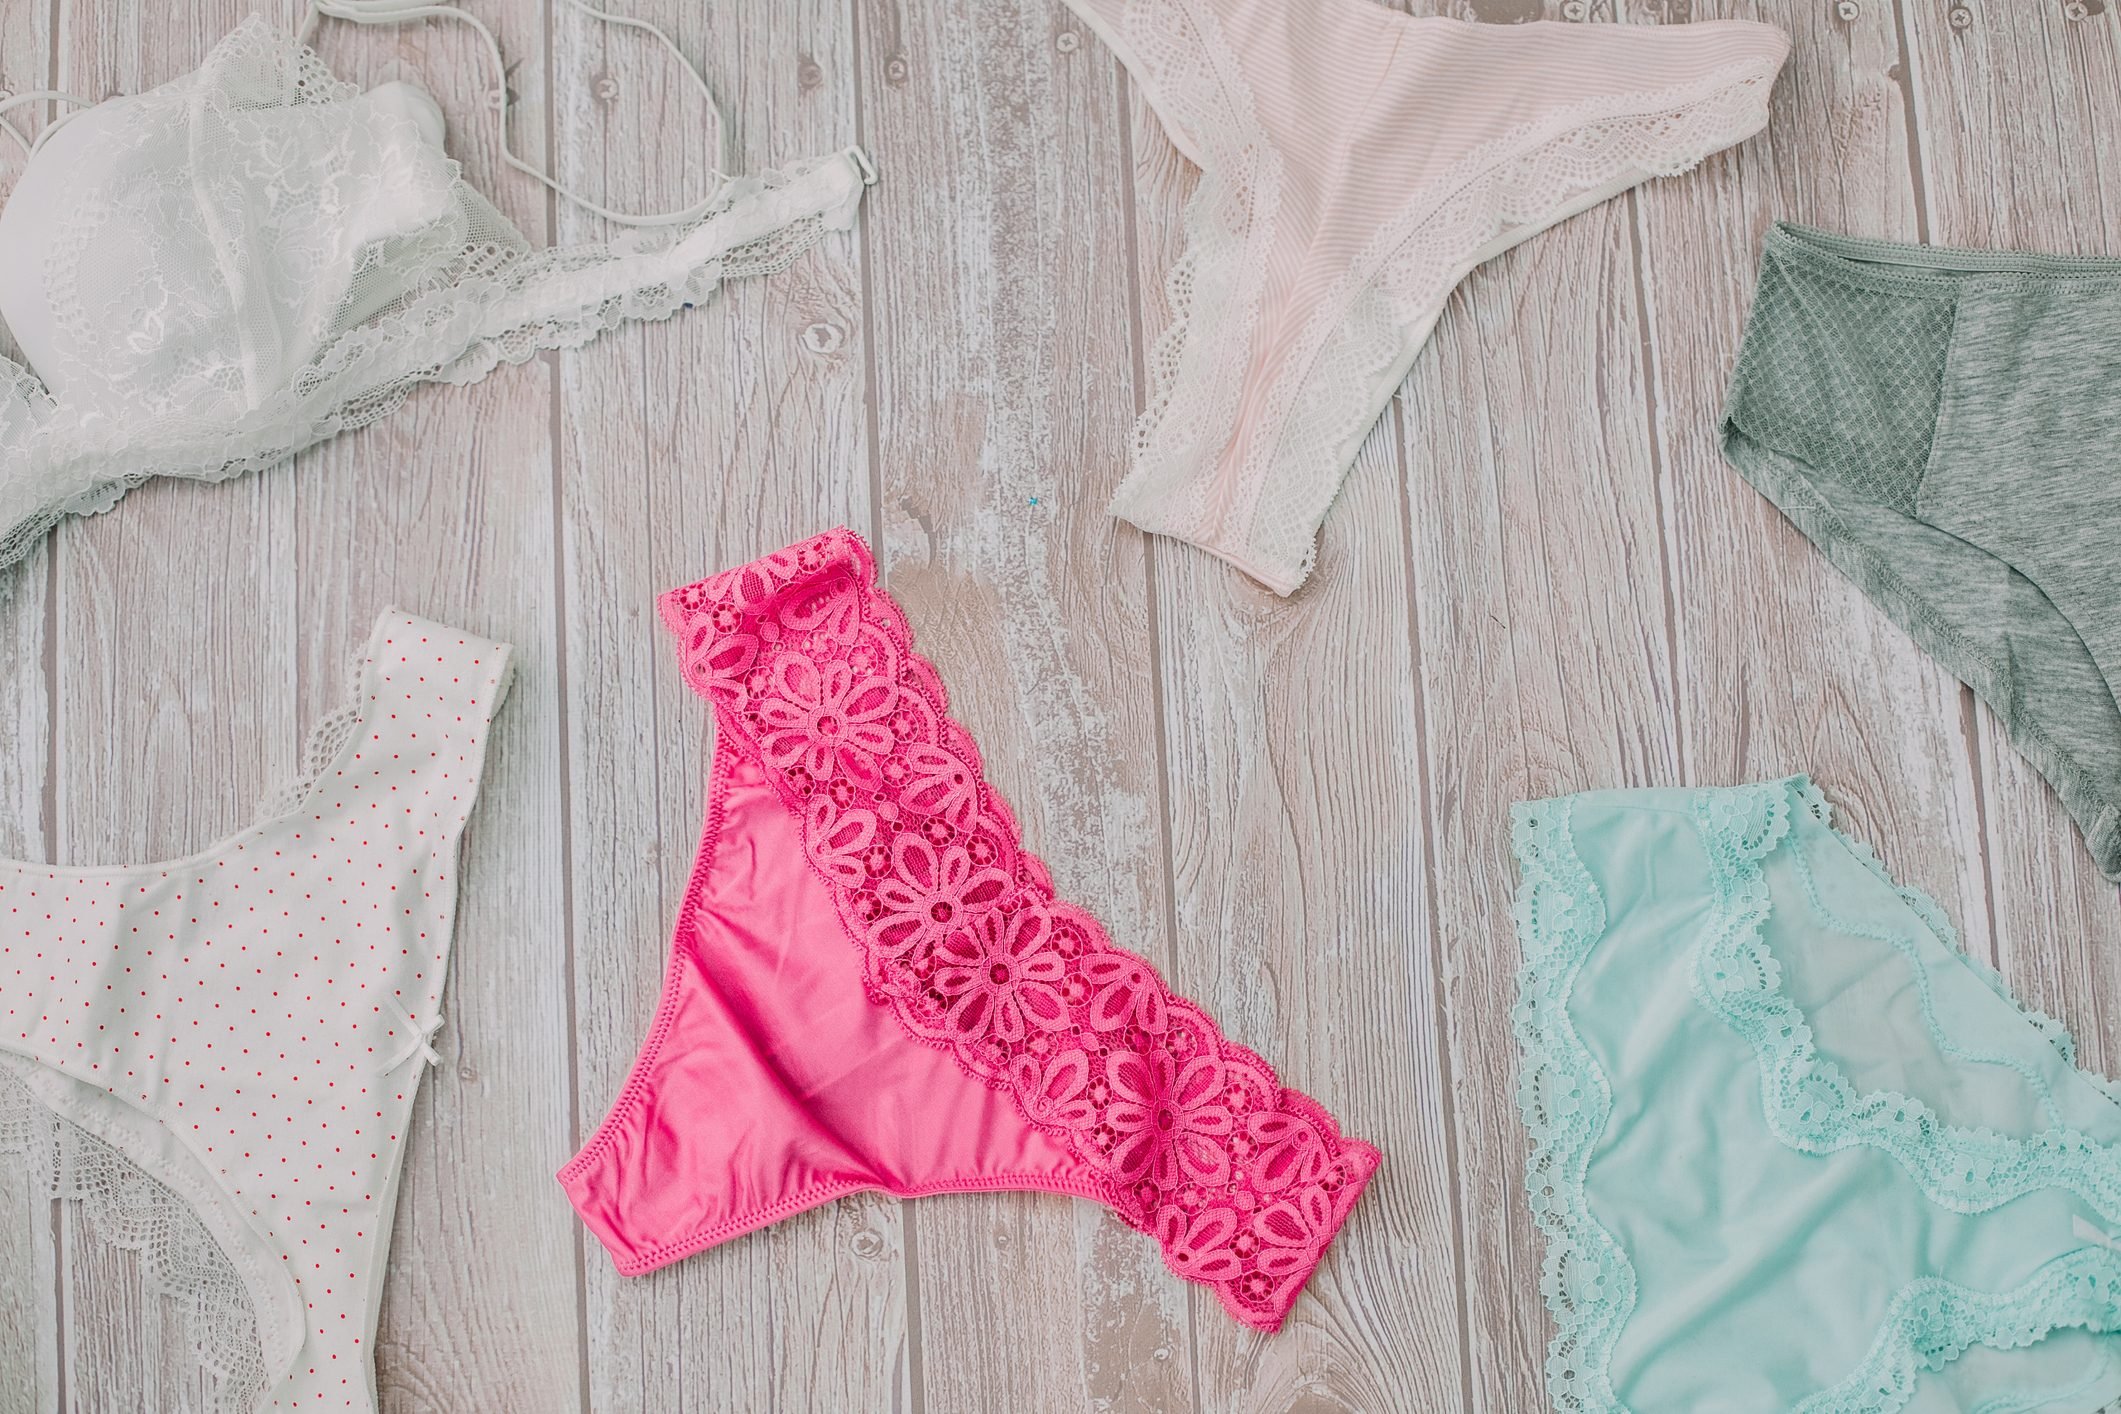 Don't repeat those undies! Dirty panties cause vaginitis - The Standard  Health